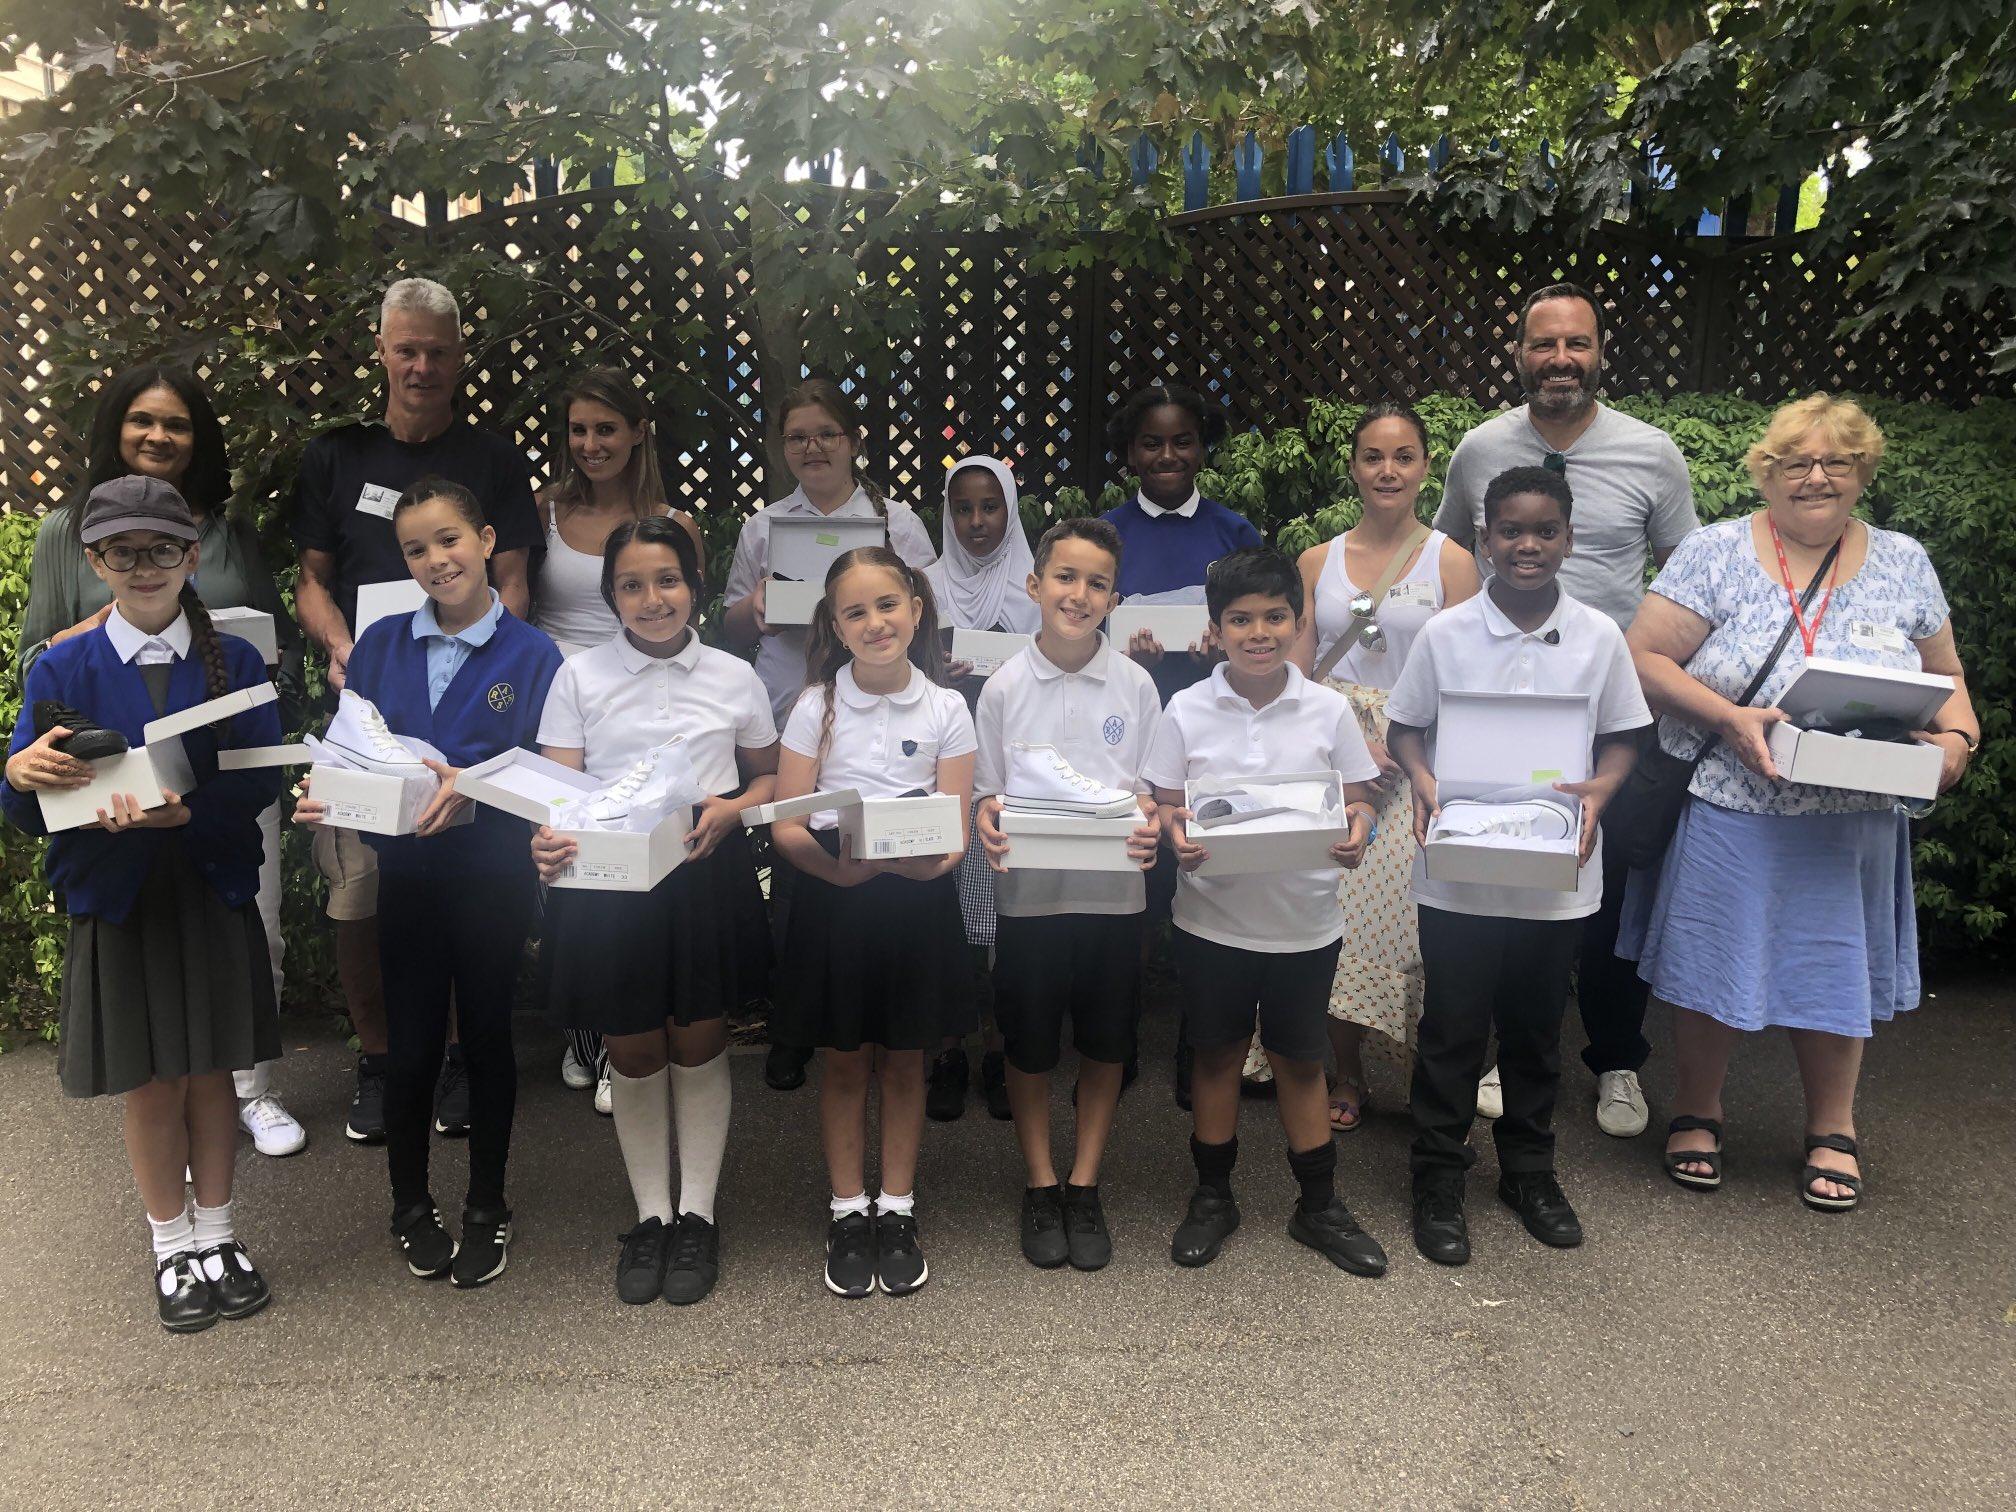 A picture of Haringey Council's Cabinet Member for Children, Schools & Families, Cllr Zena Brabazon, & Debra Reiss Foundation representatives with pupils, parents & staff at Risley Avenue Primary School.